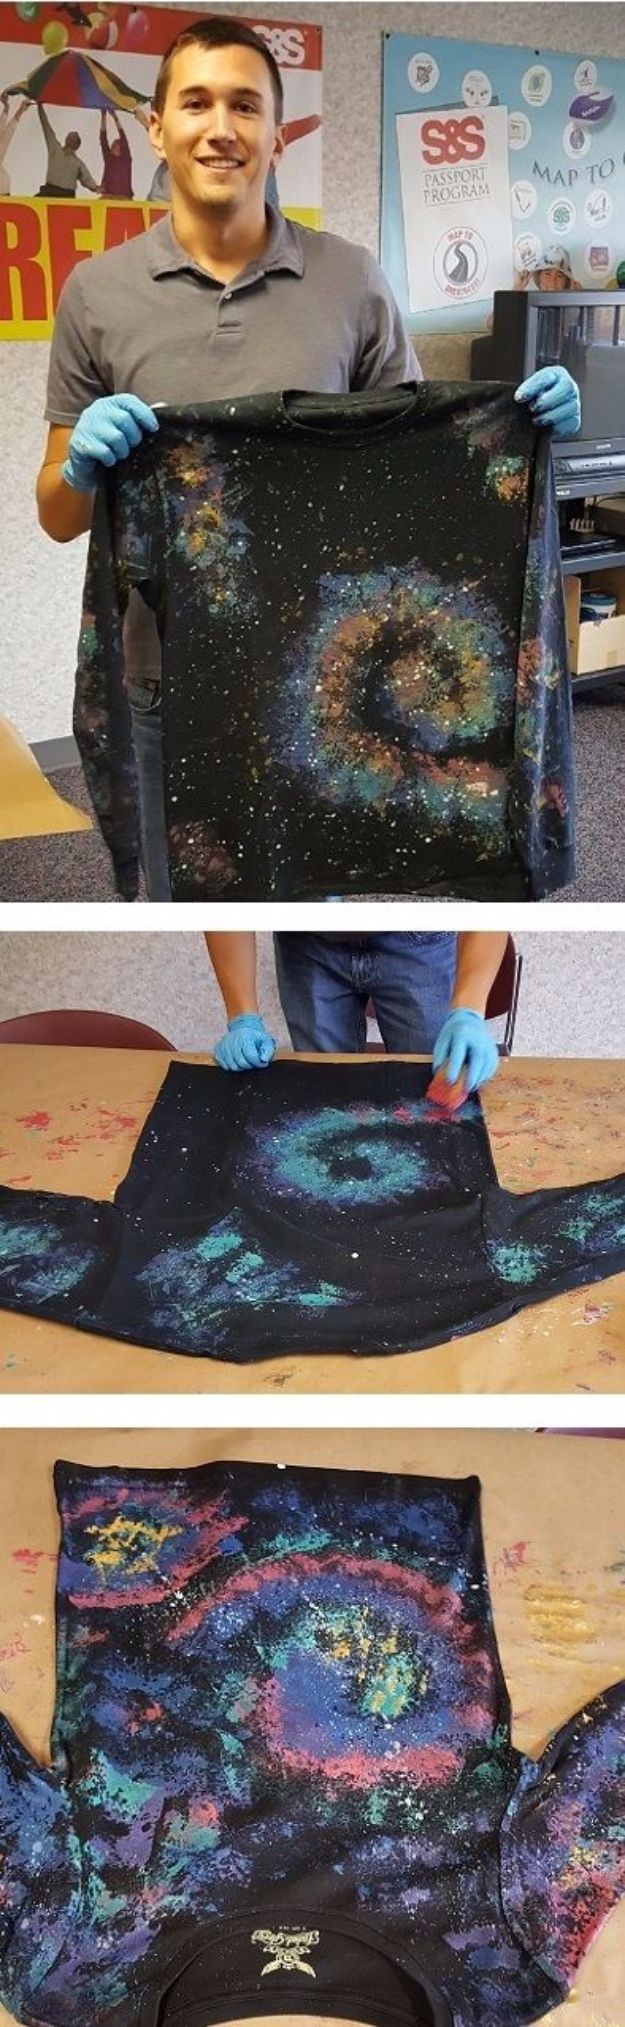 Galaxy DIY Crafts - DIY Galaxy Shirts - Easy Room Decor, Cool Clothes, Fun Fabric Ideas and Painting Projects - Food, Cookies and Cupcake Recipes - Nebula Galaxy In A Jar - Art for Your Bedroom - Shirt, Backpack, Soap, Decorations for Teens, Kids and Adults